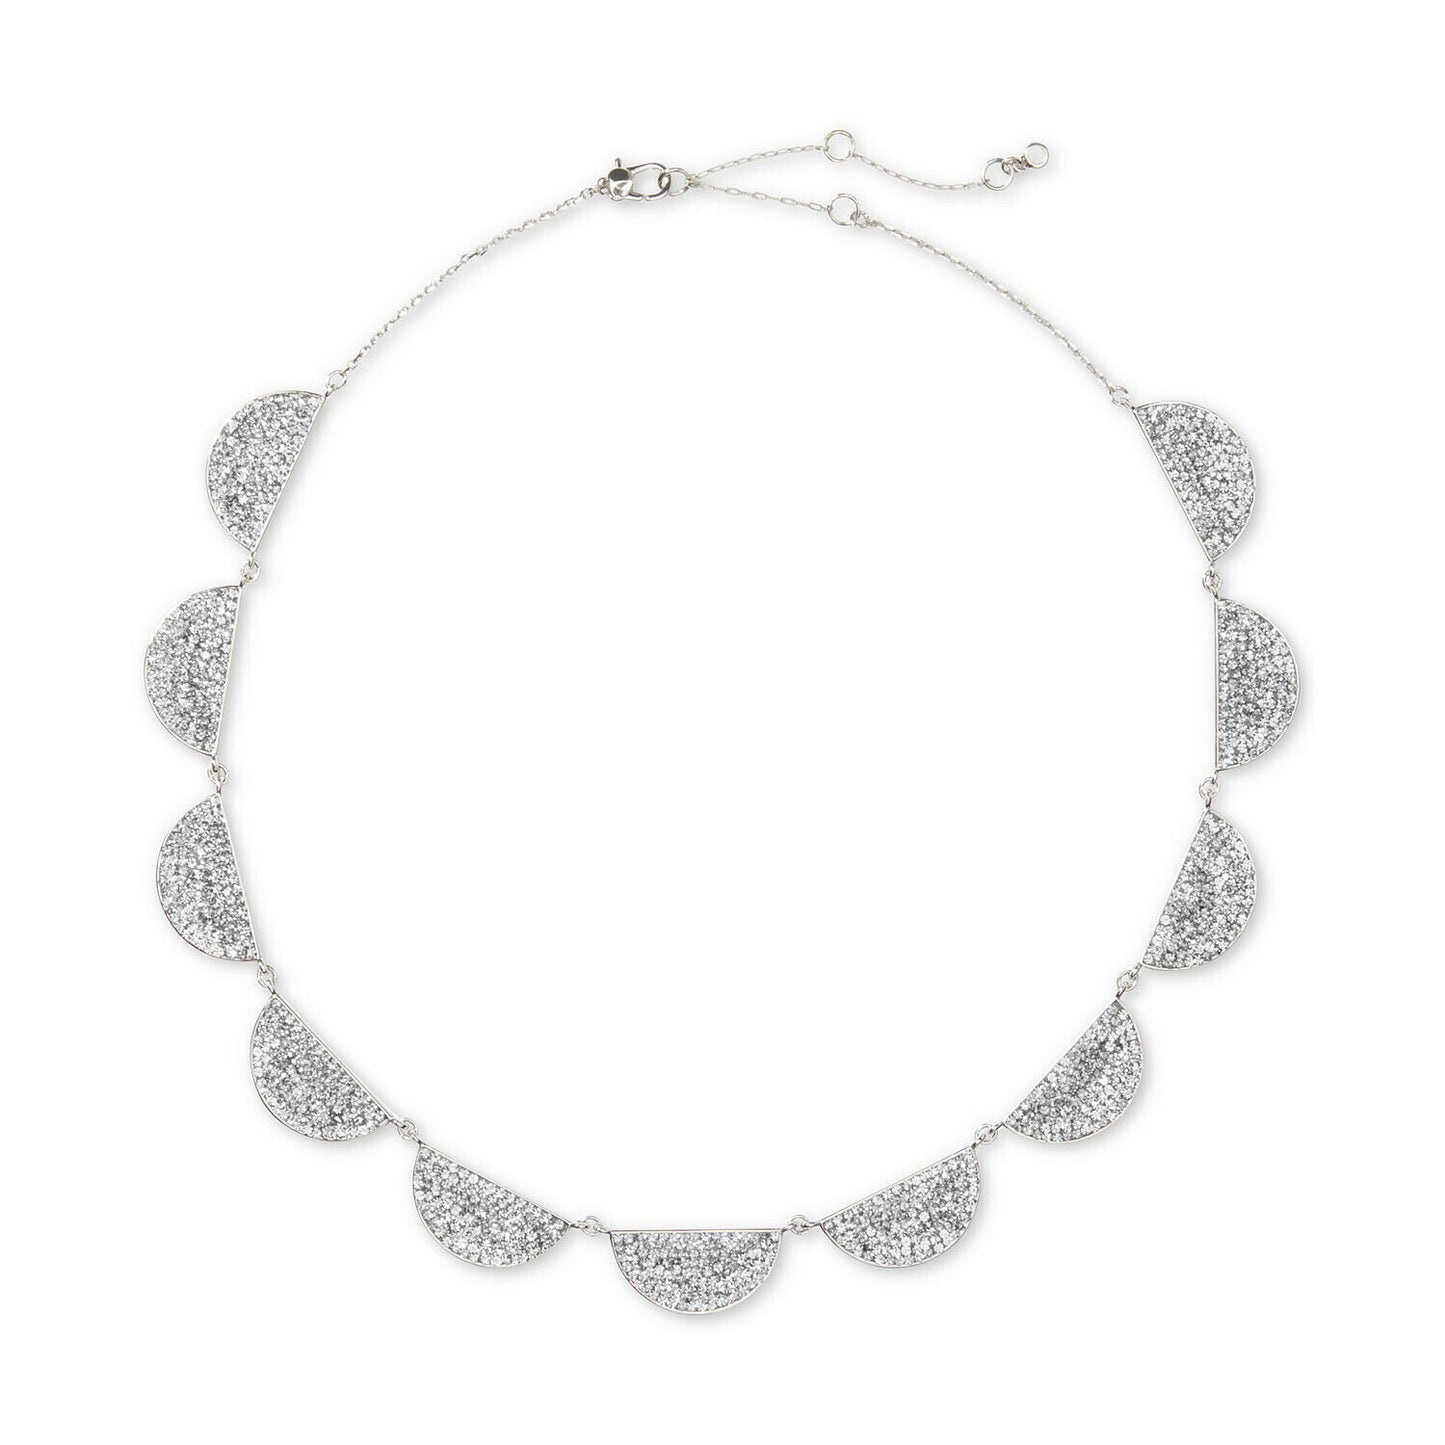 Kate Spade Silver Crystal Mod Scallop Pave Statement Necklace NWT